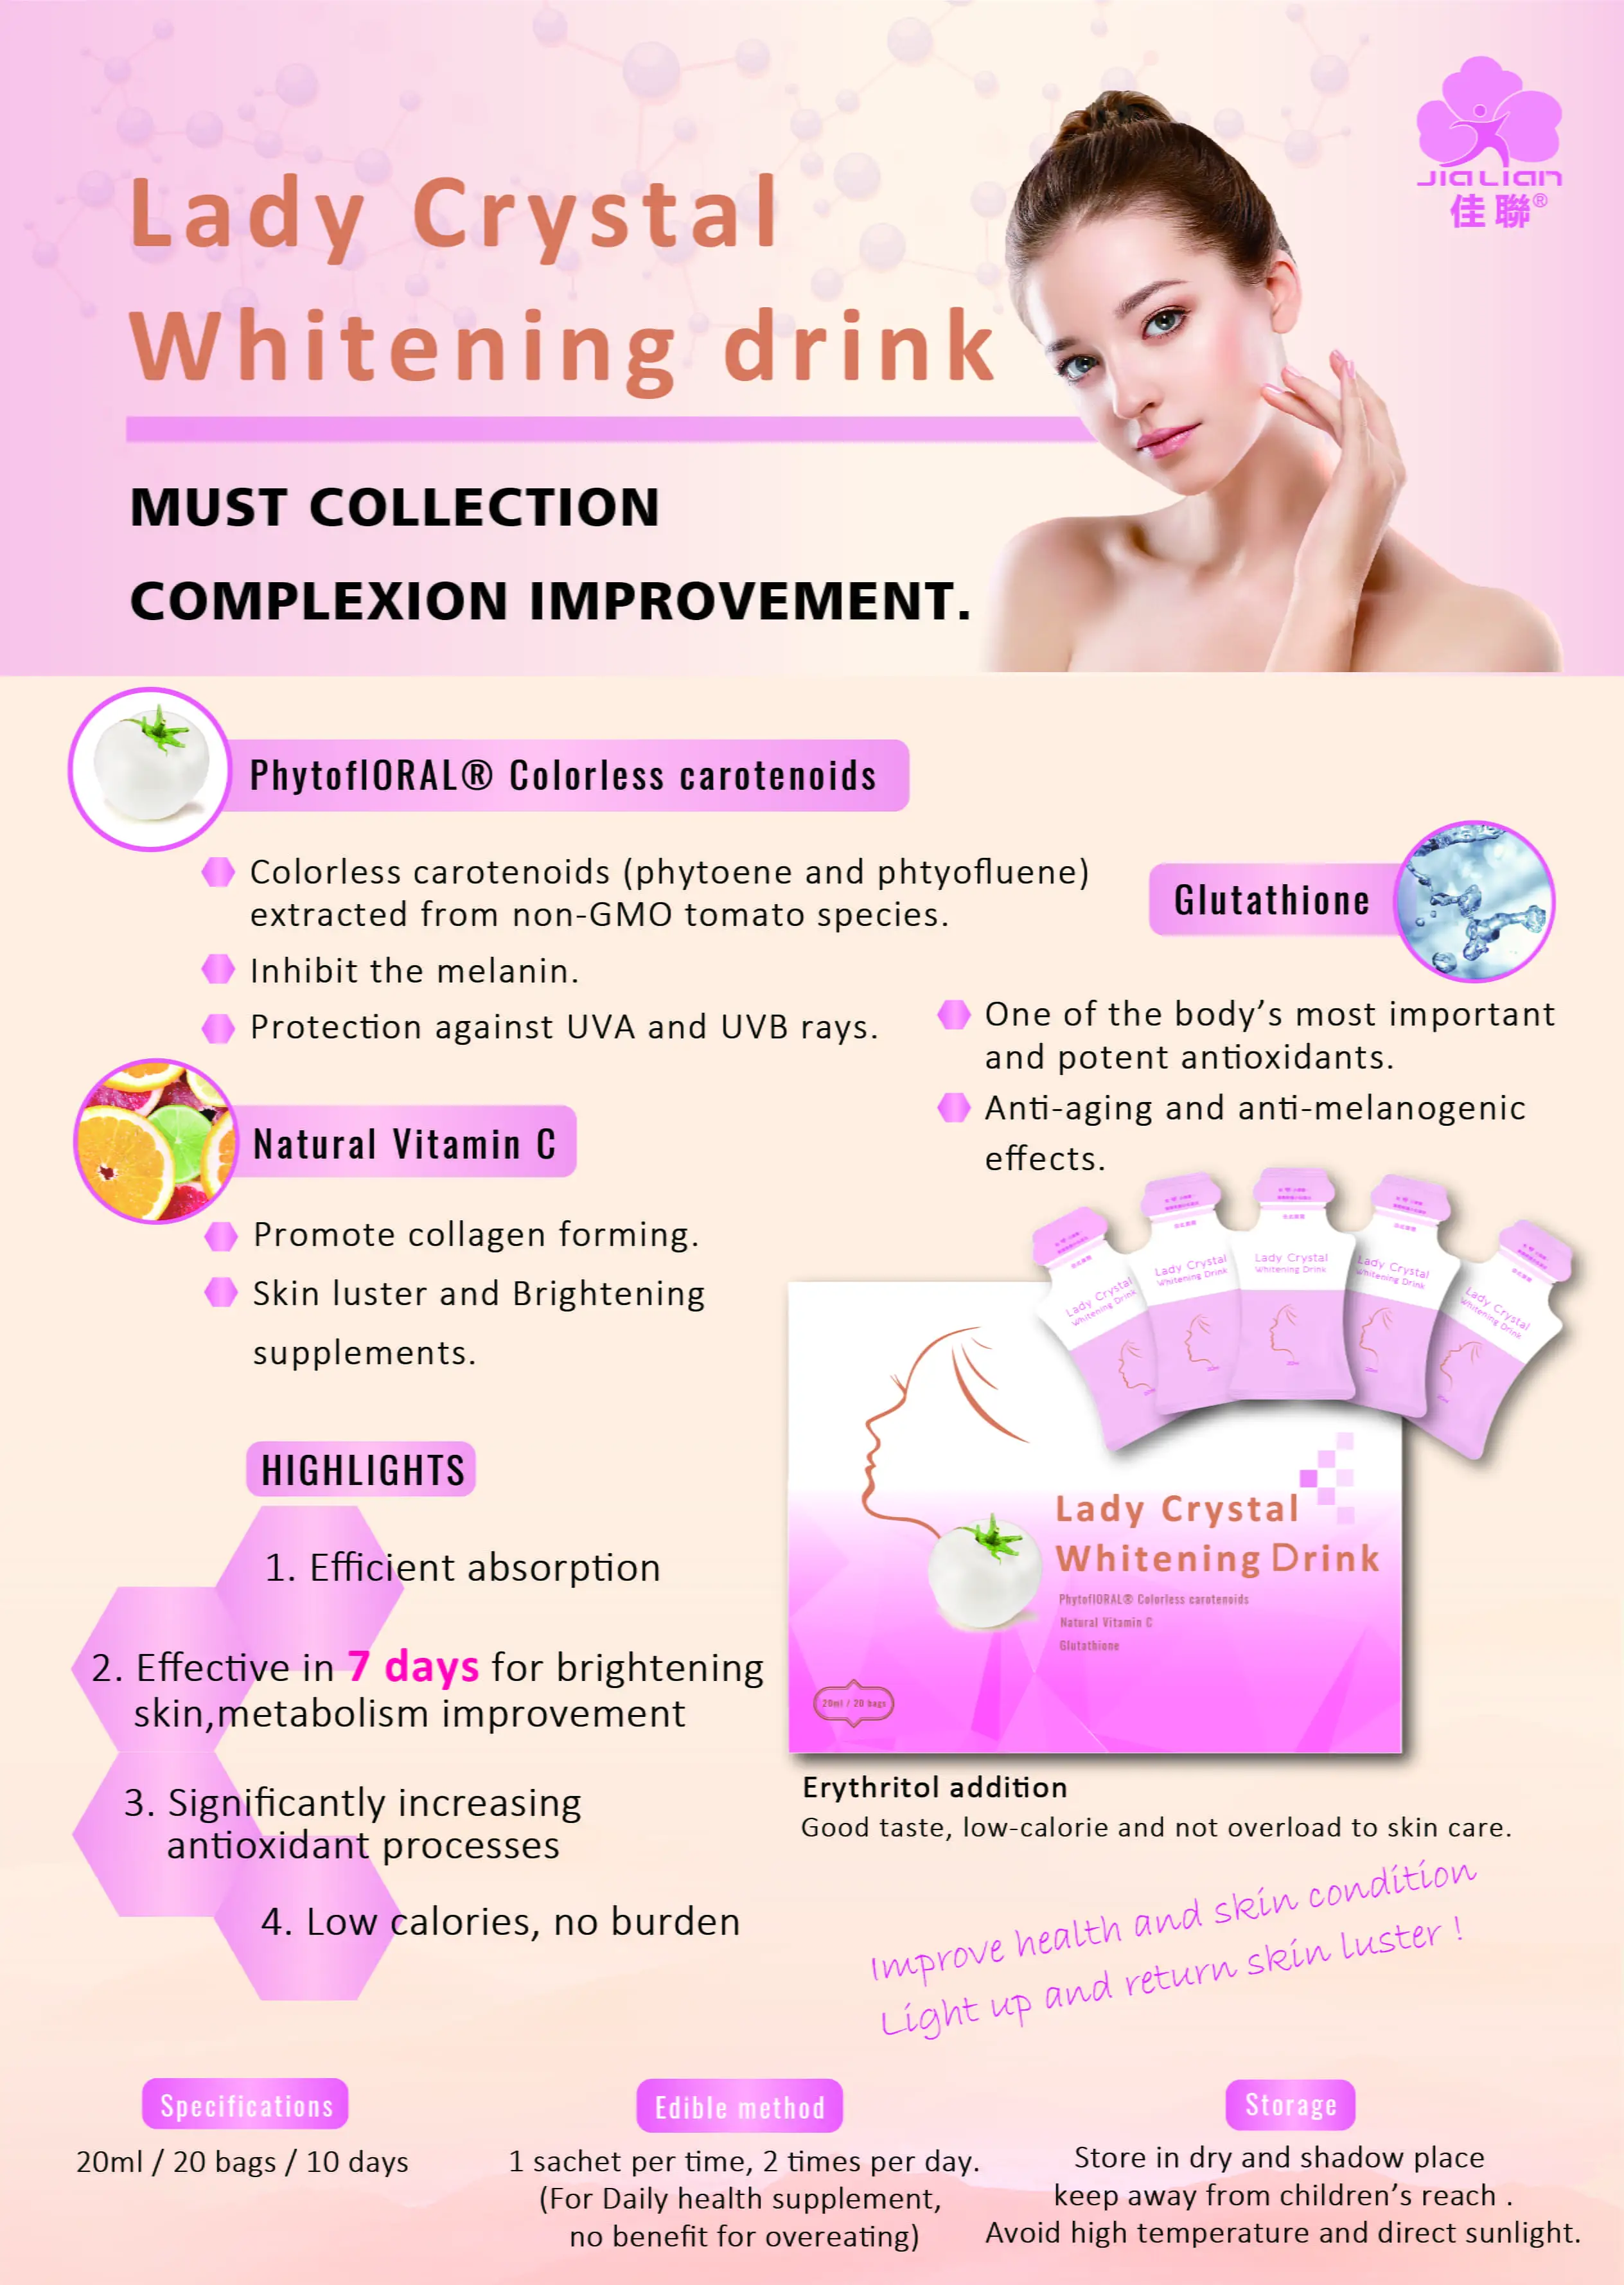 
sample for skin whitening beauty product drink 